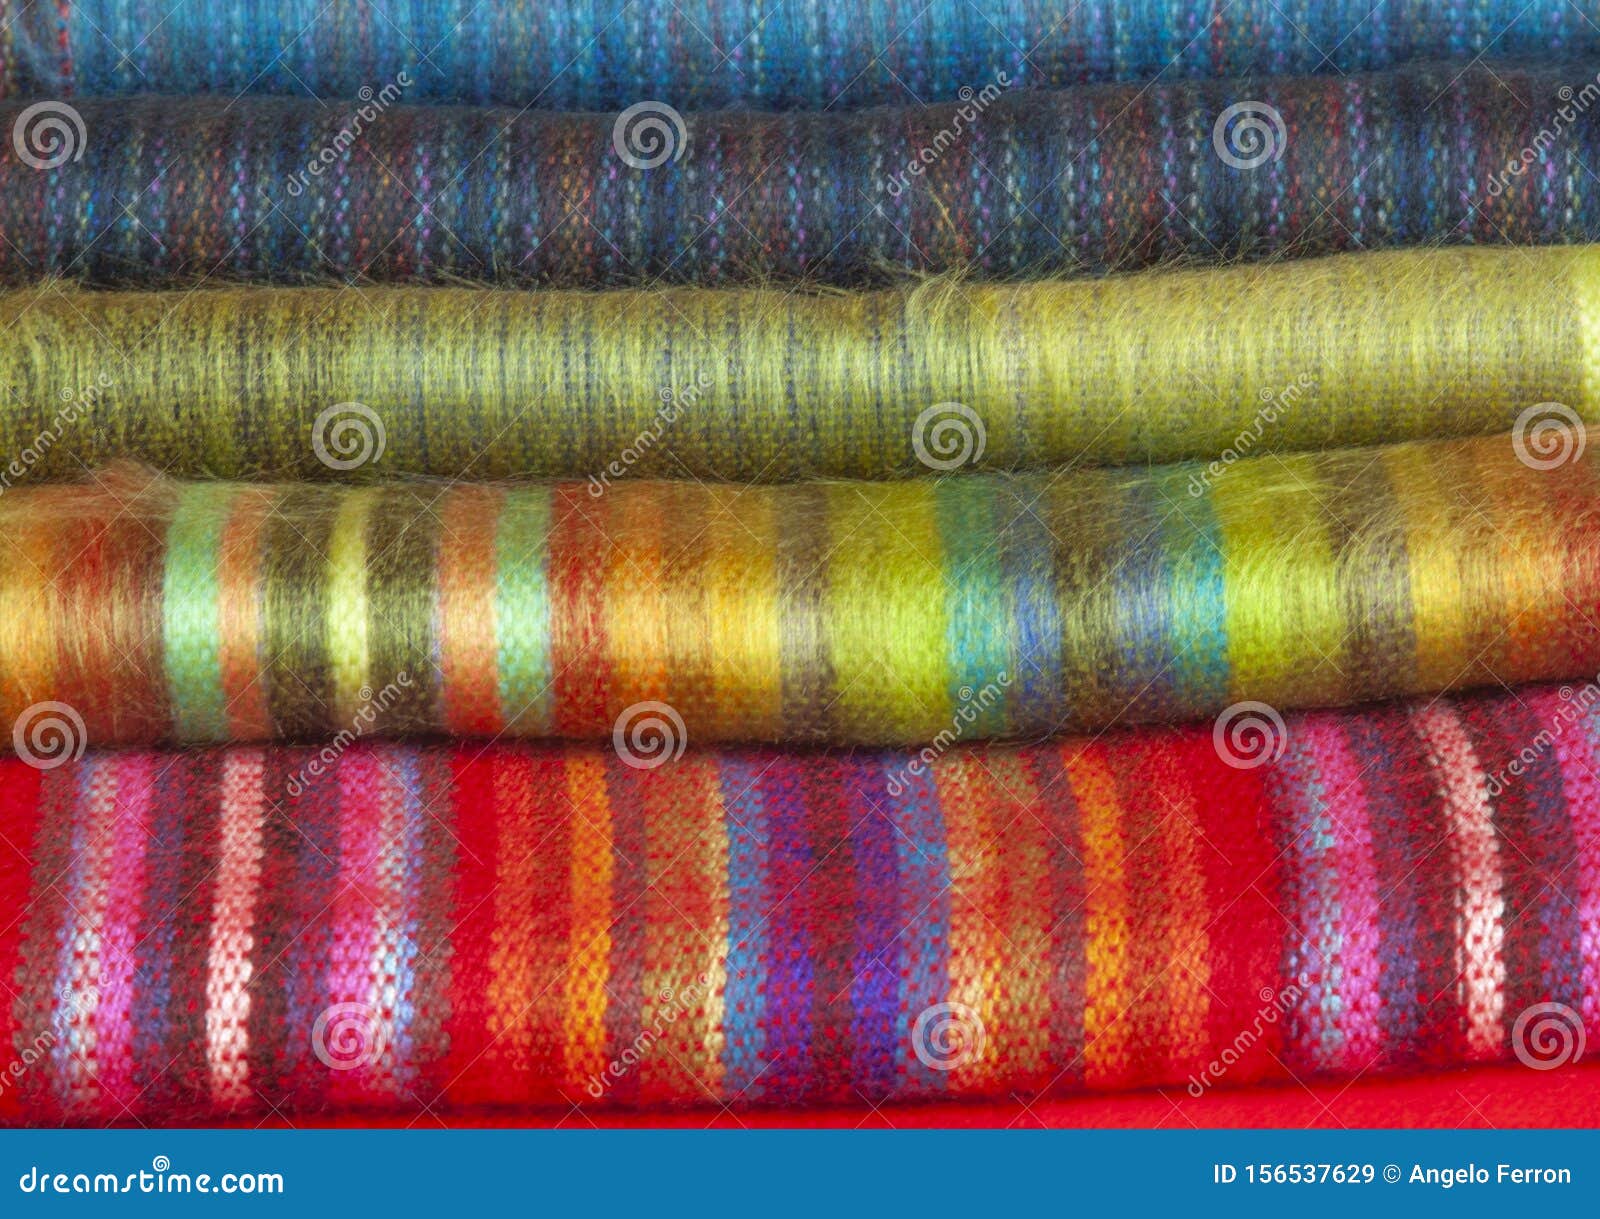 Material Display in Colored and Woven Alpaca Alpaca Fabric Stock